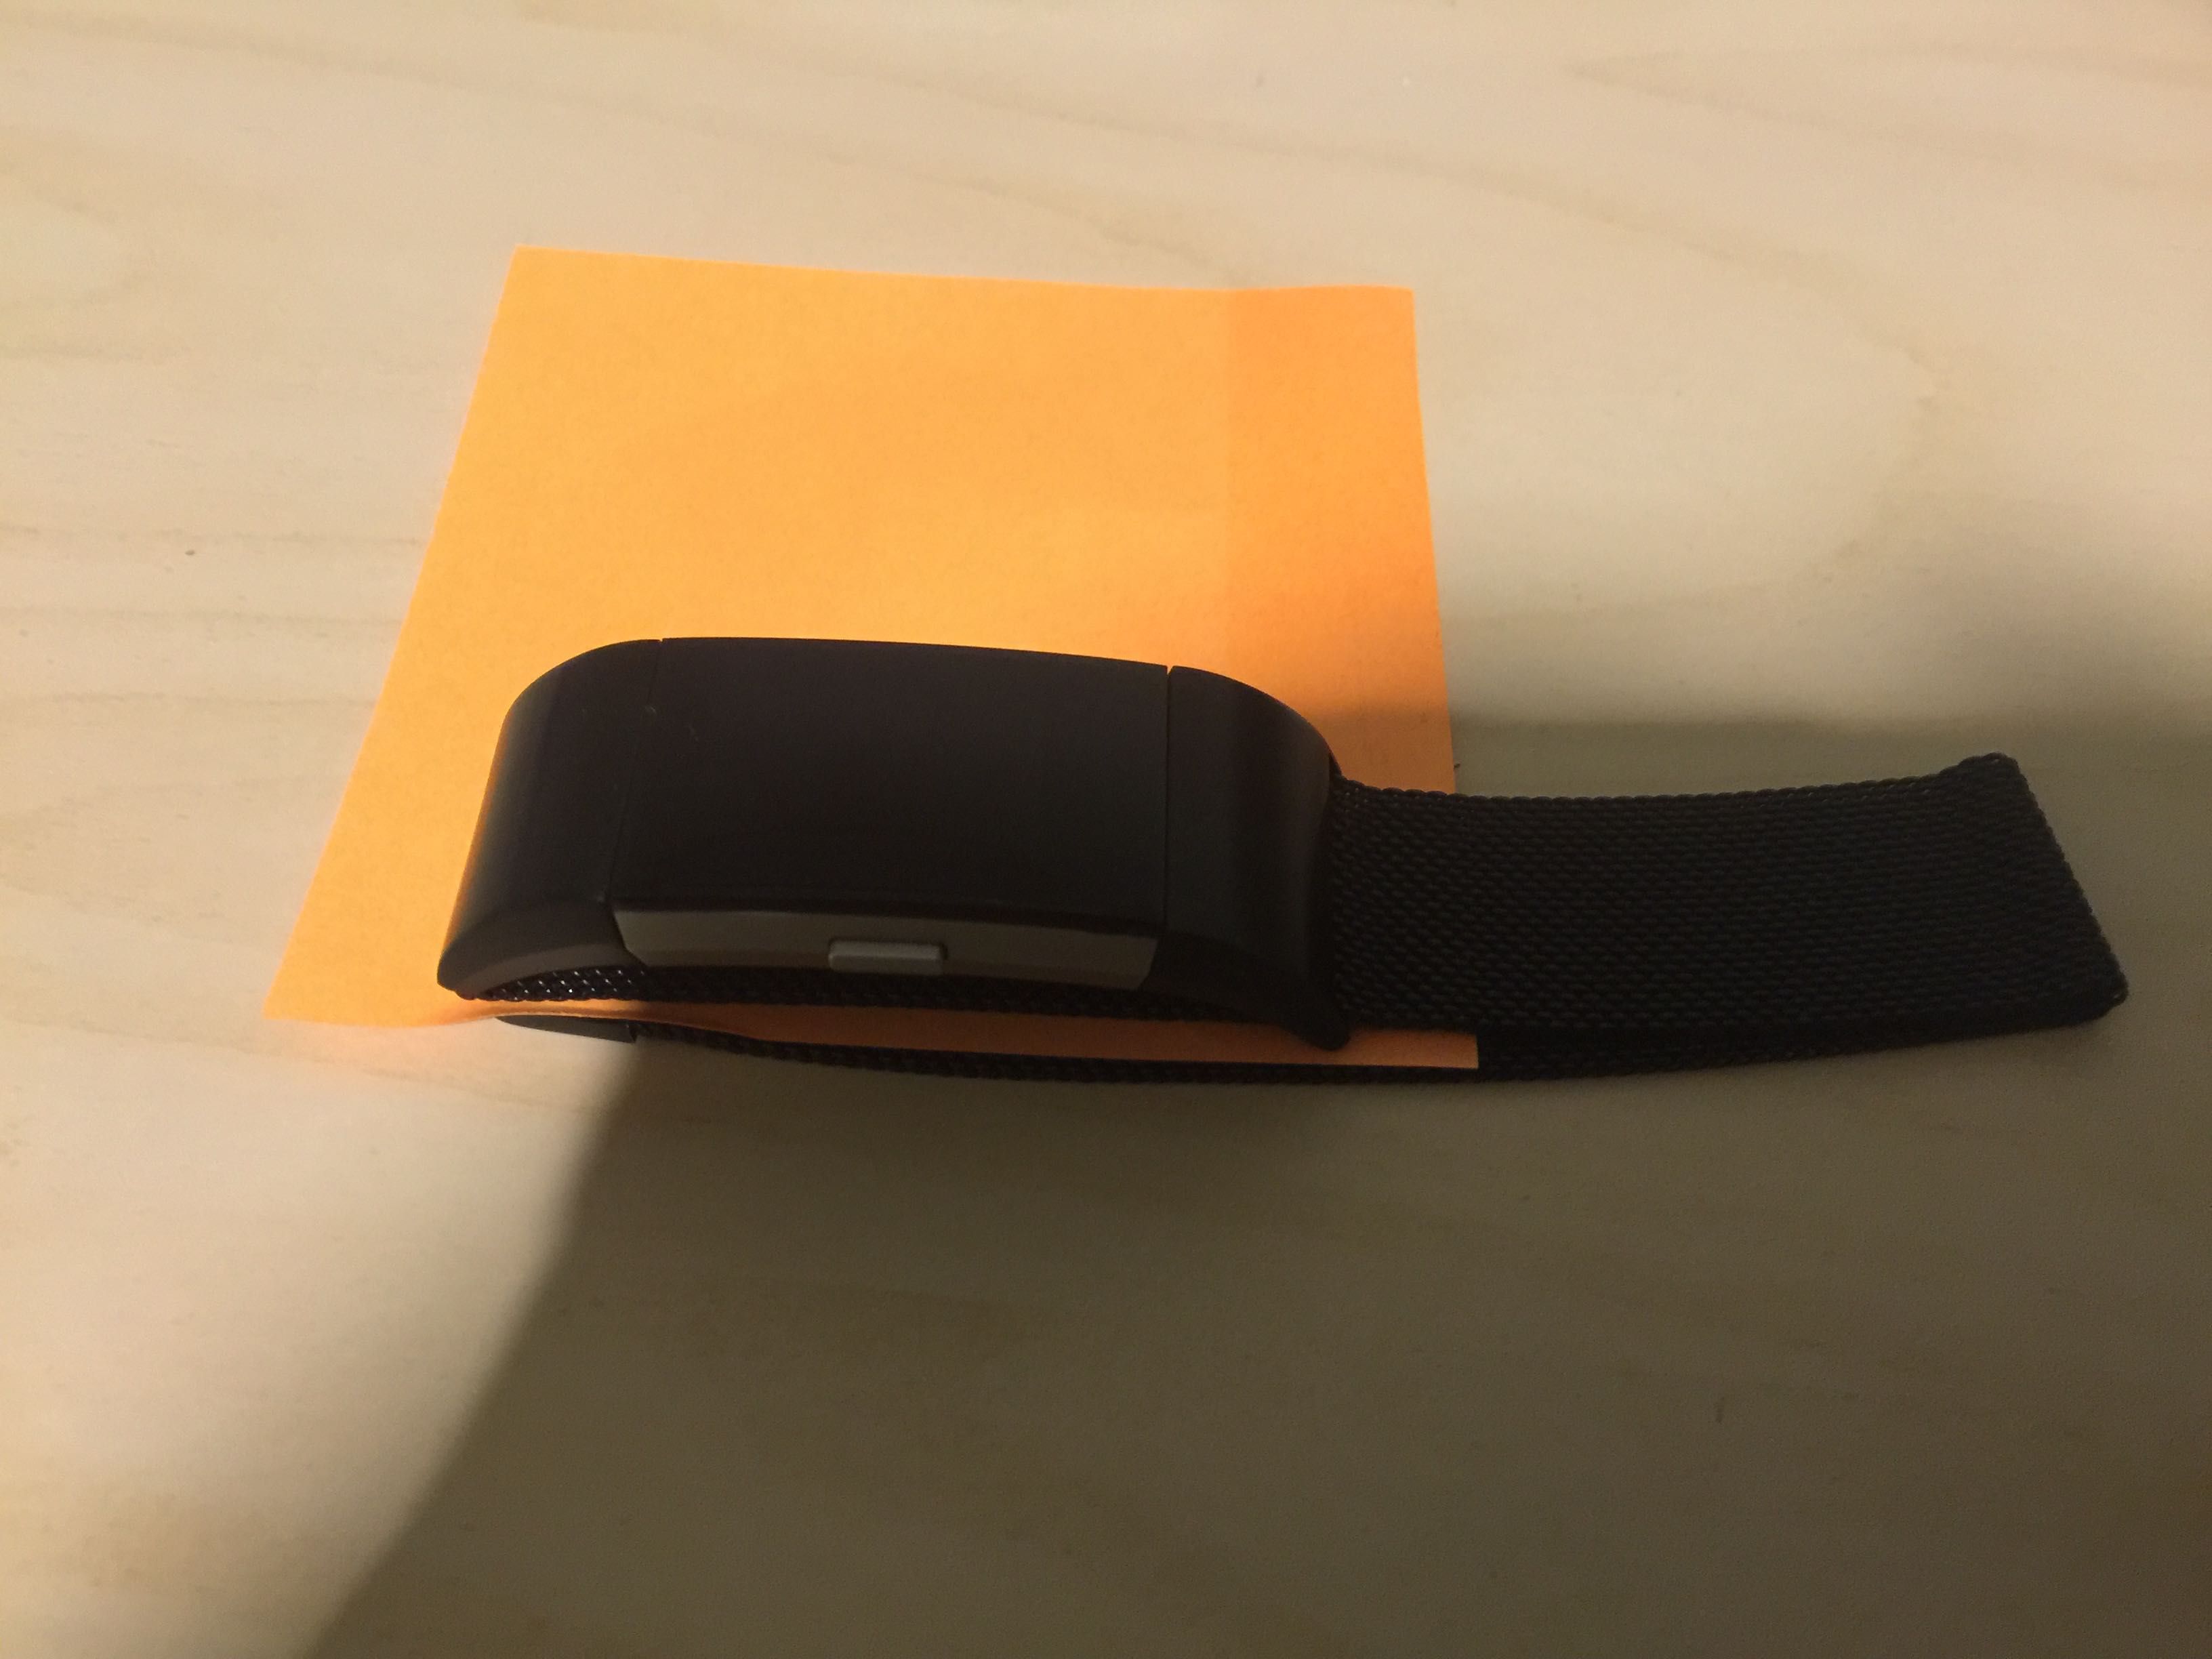 fitbit charge 4 clip